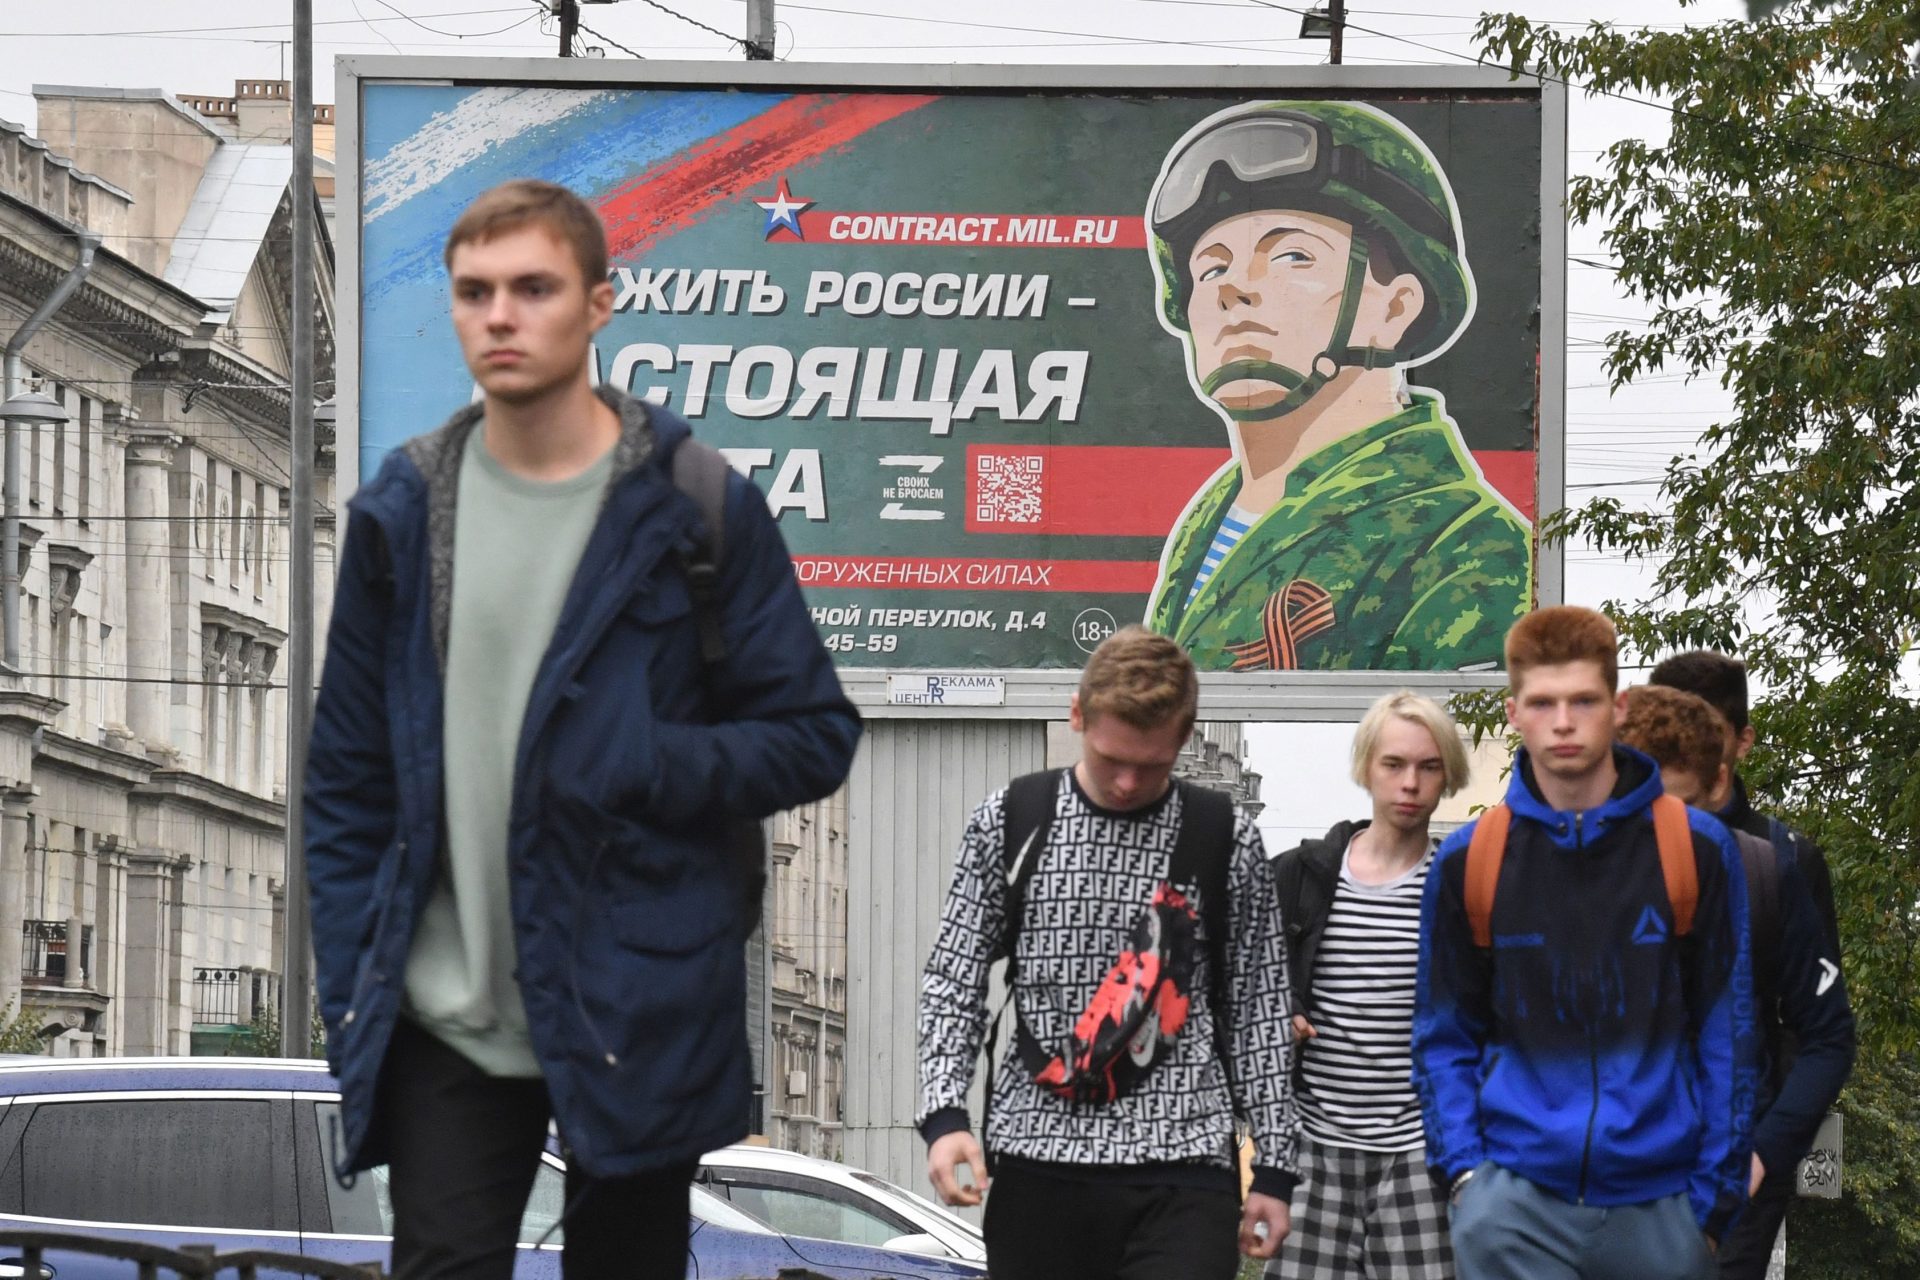 Younger Russians voiced more displeasure 